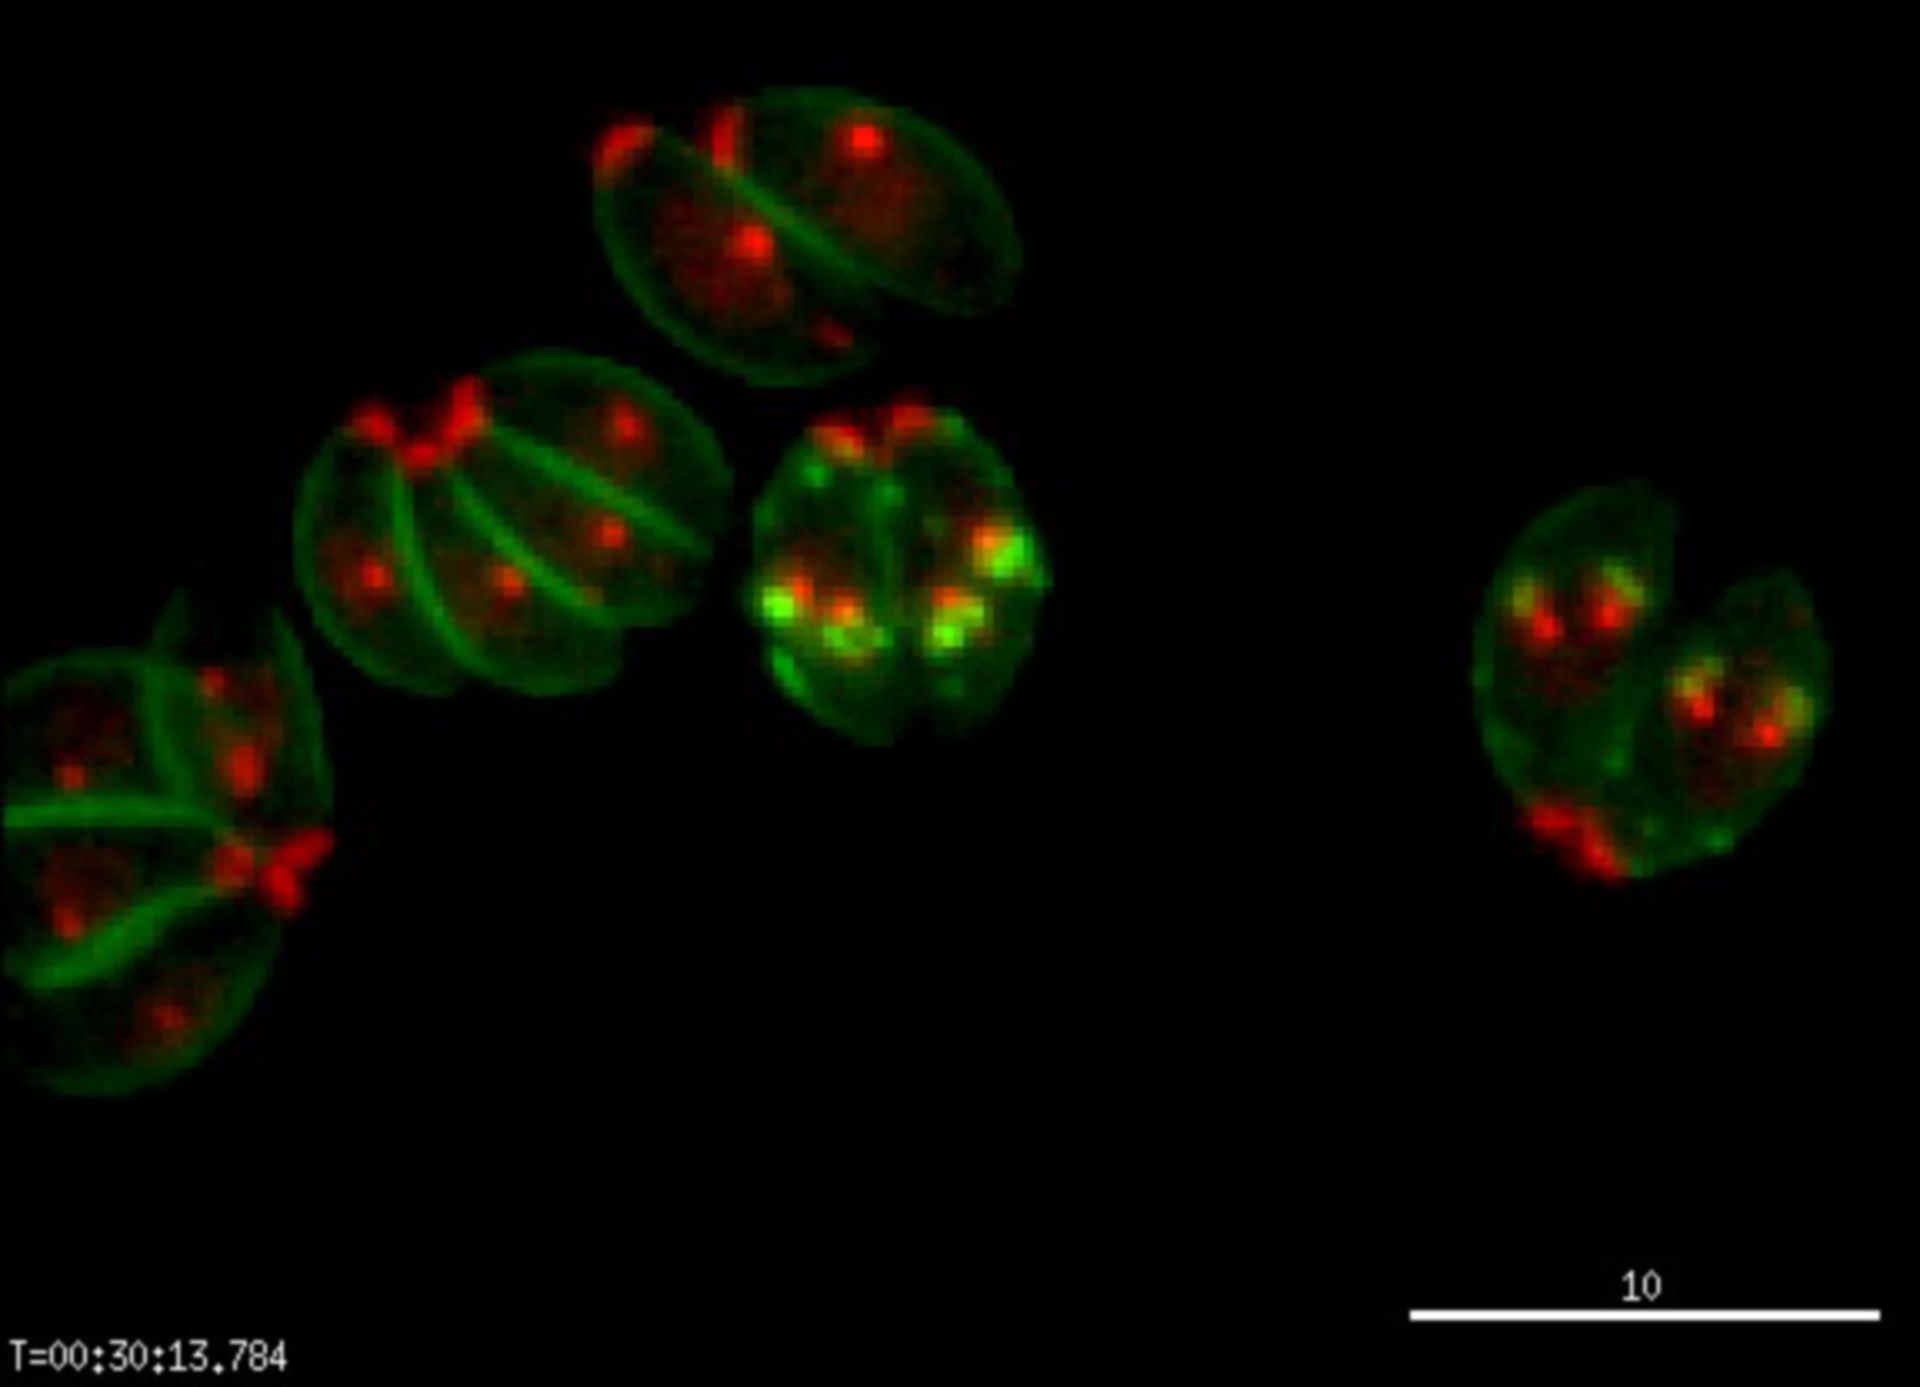 Toxoplasma gondii RH (Basal part of cell) - CIL:10525